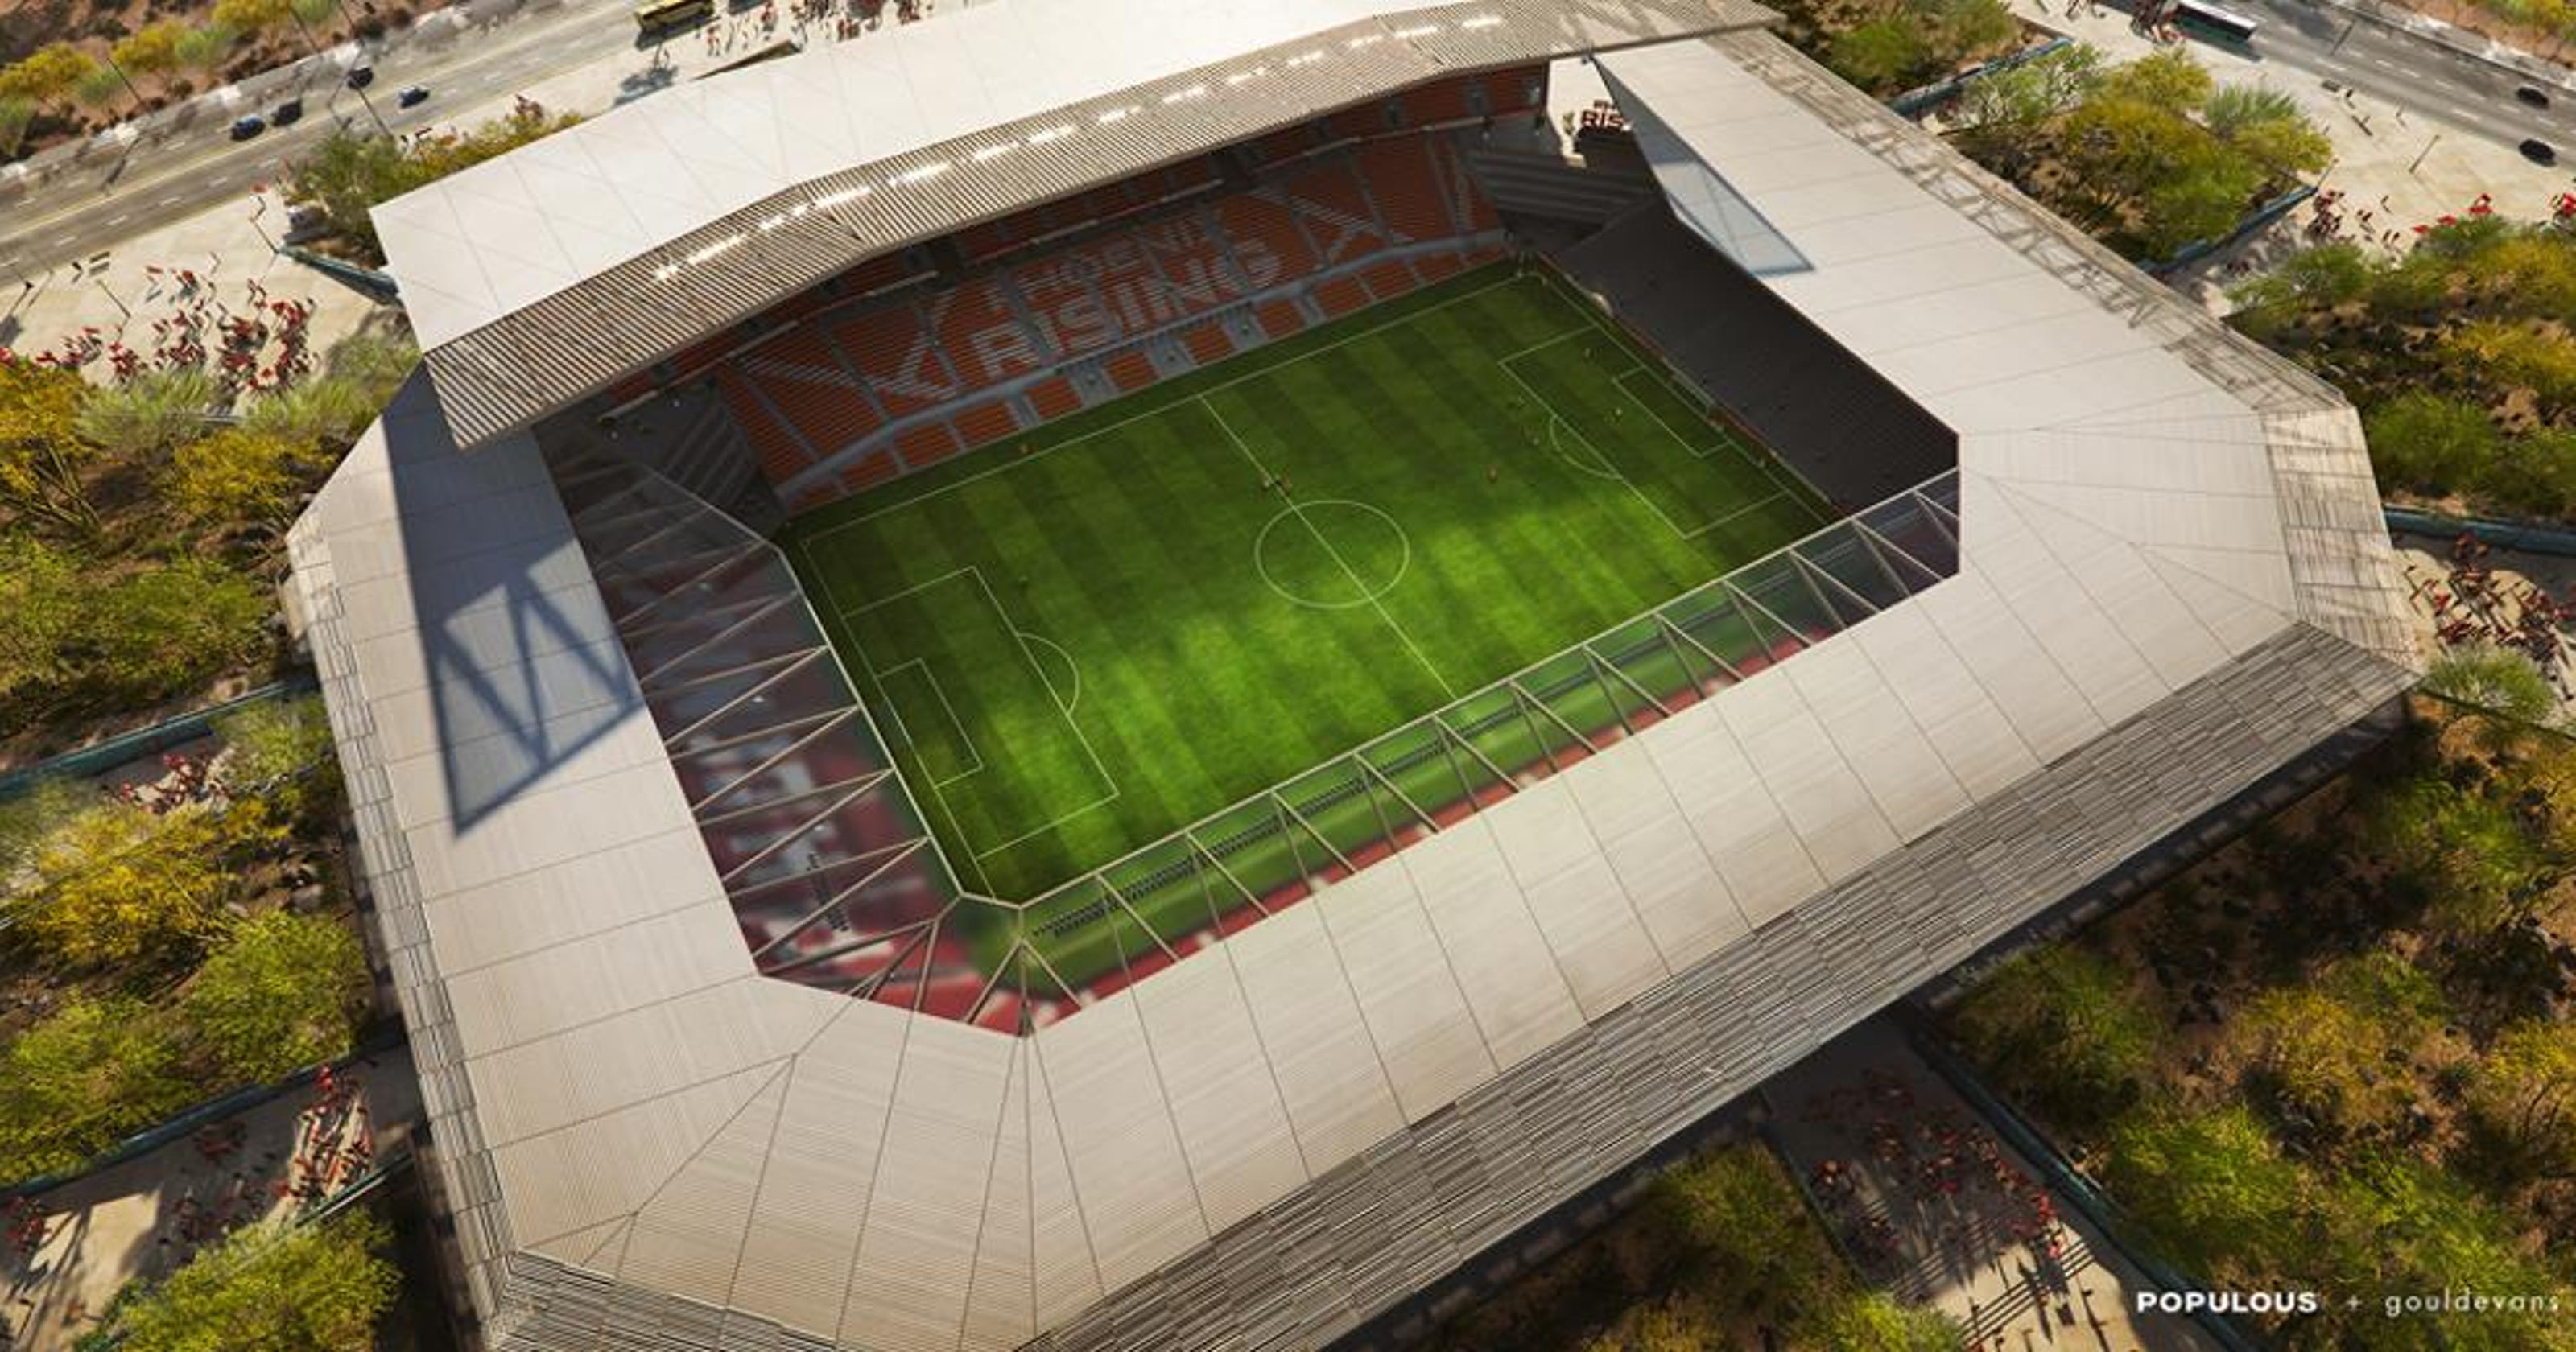 Phoenix Rising Wants To Pay For Its Own Soccer Stadium Wow